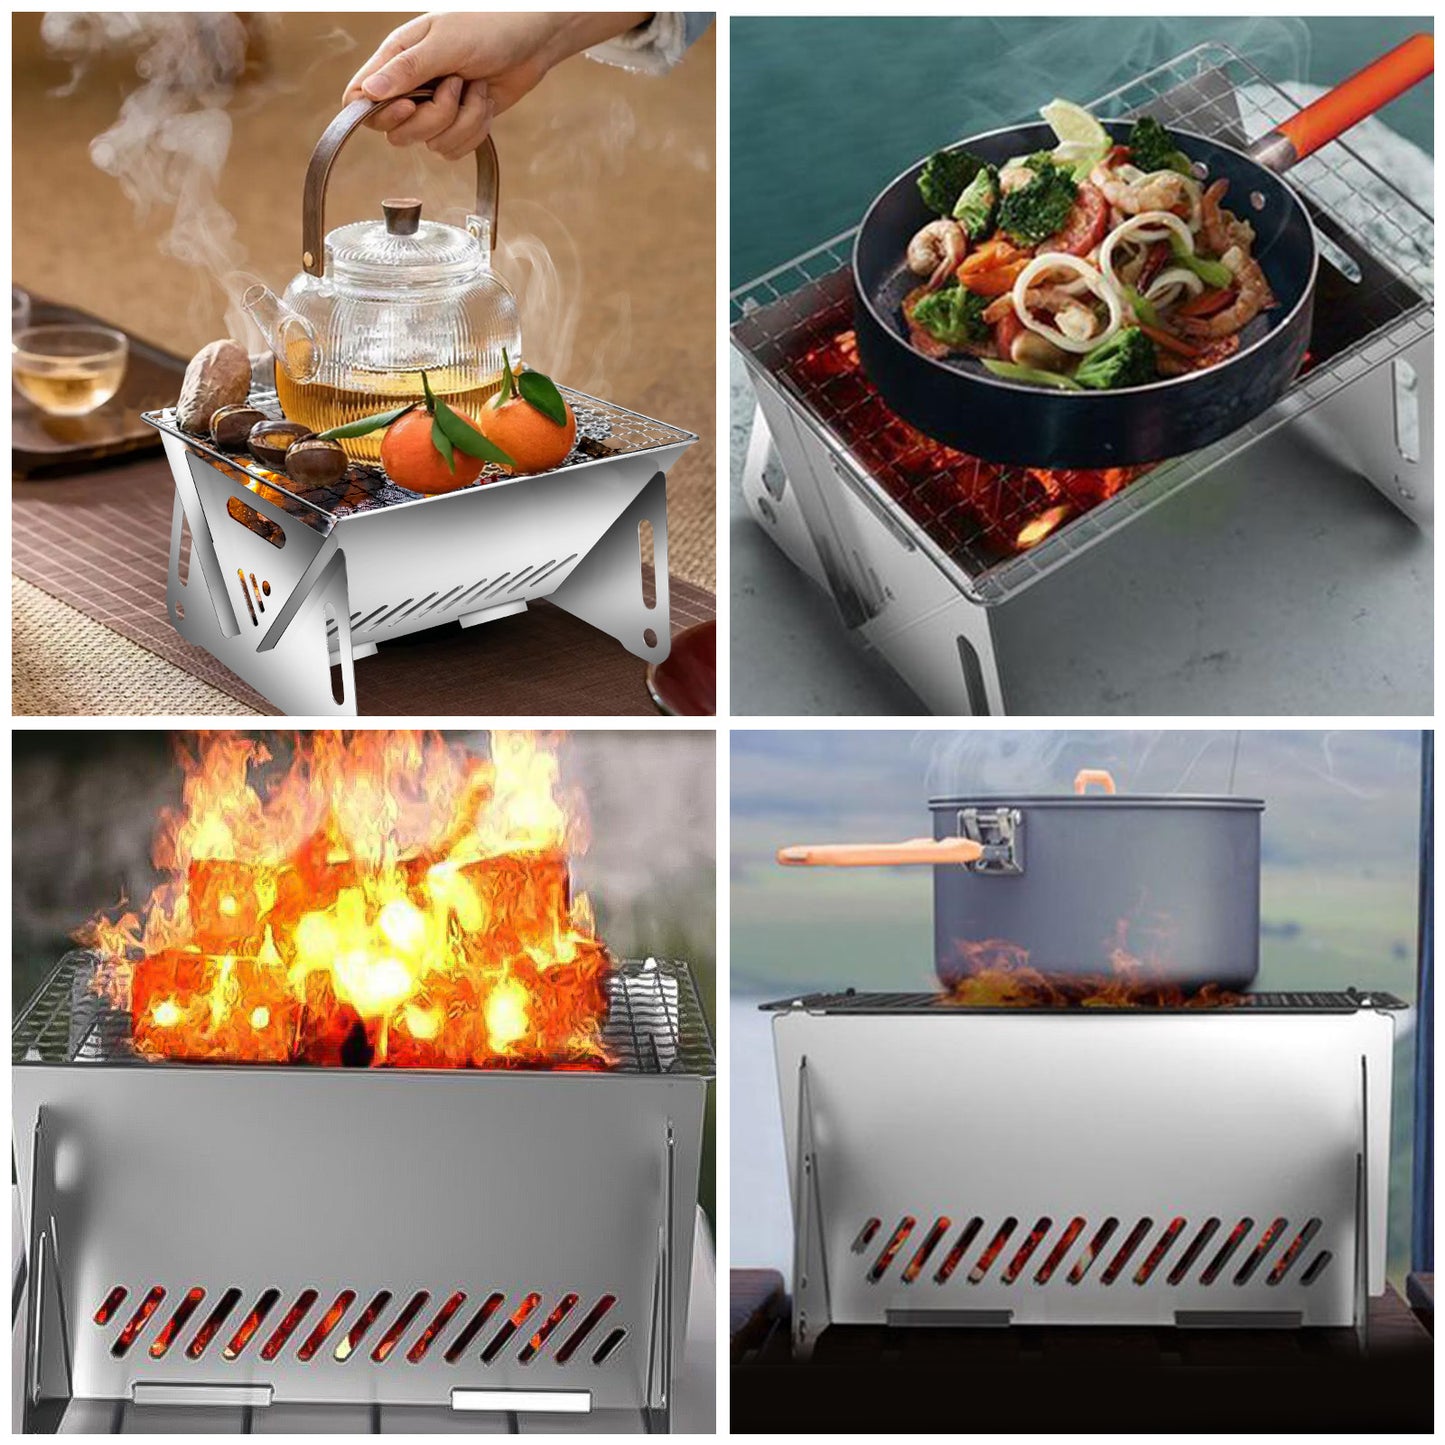 Mini Stainless Steel Folding Grill - Assembled Charcoal Grills Portable Barbecue Desk Tabletop BBQ Grills Outdoor Cooking,Small Charcoal Grill Camping Oven For Camping,Holiday,Beach